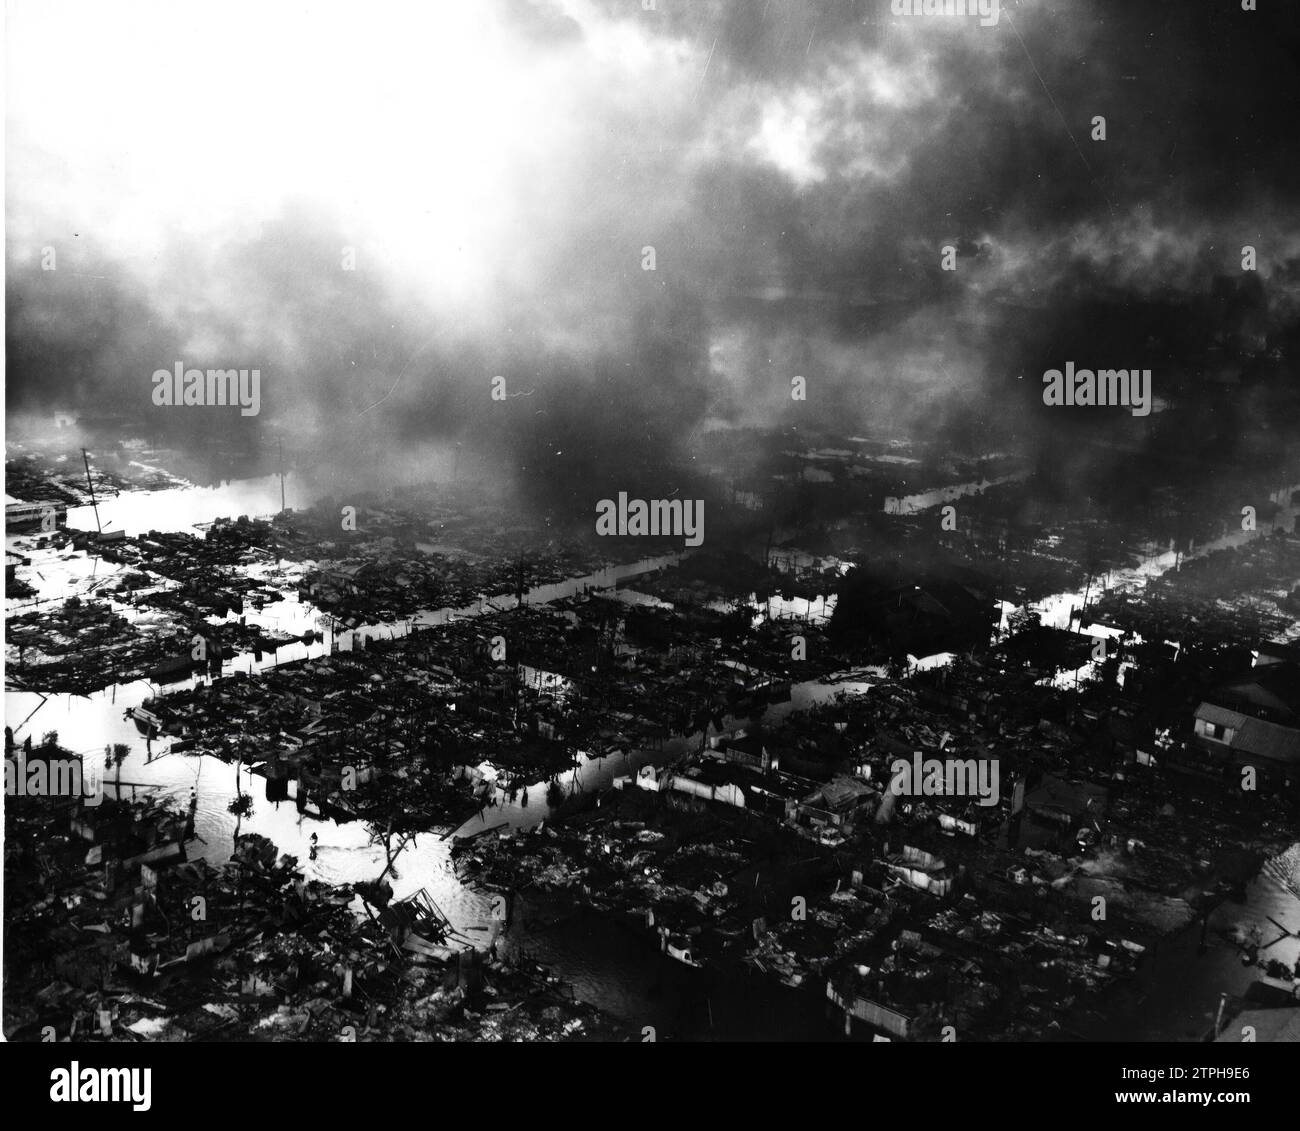 05/31/1964. An Aerial View of the City of Niigata Floating on the Waters of the Shinano River. Credit: Album / Archivo ABC / Torremocha Stock Photo